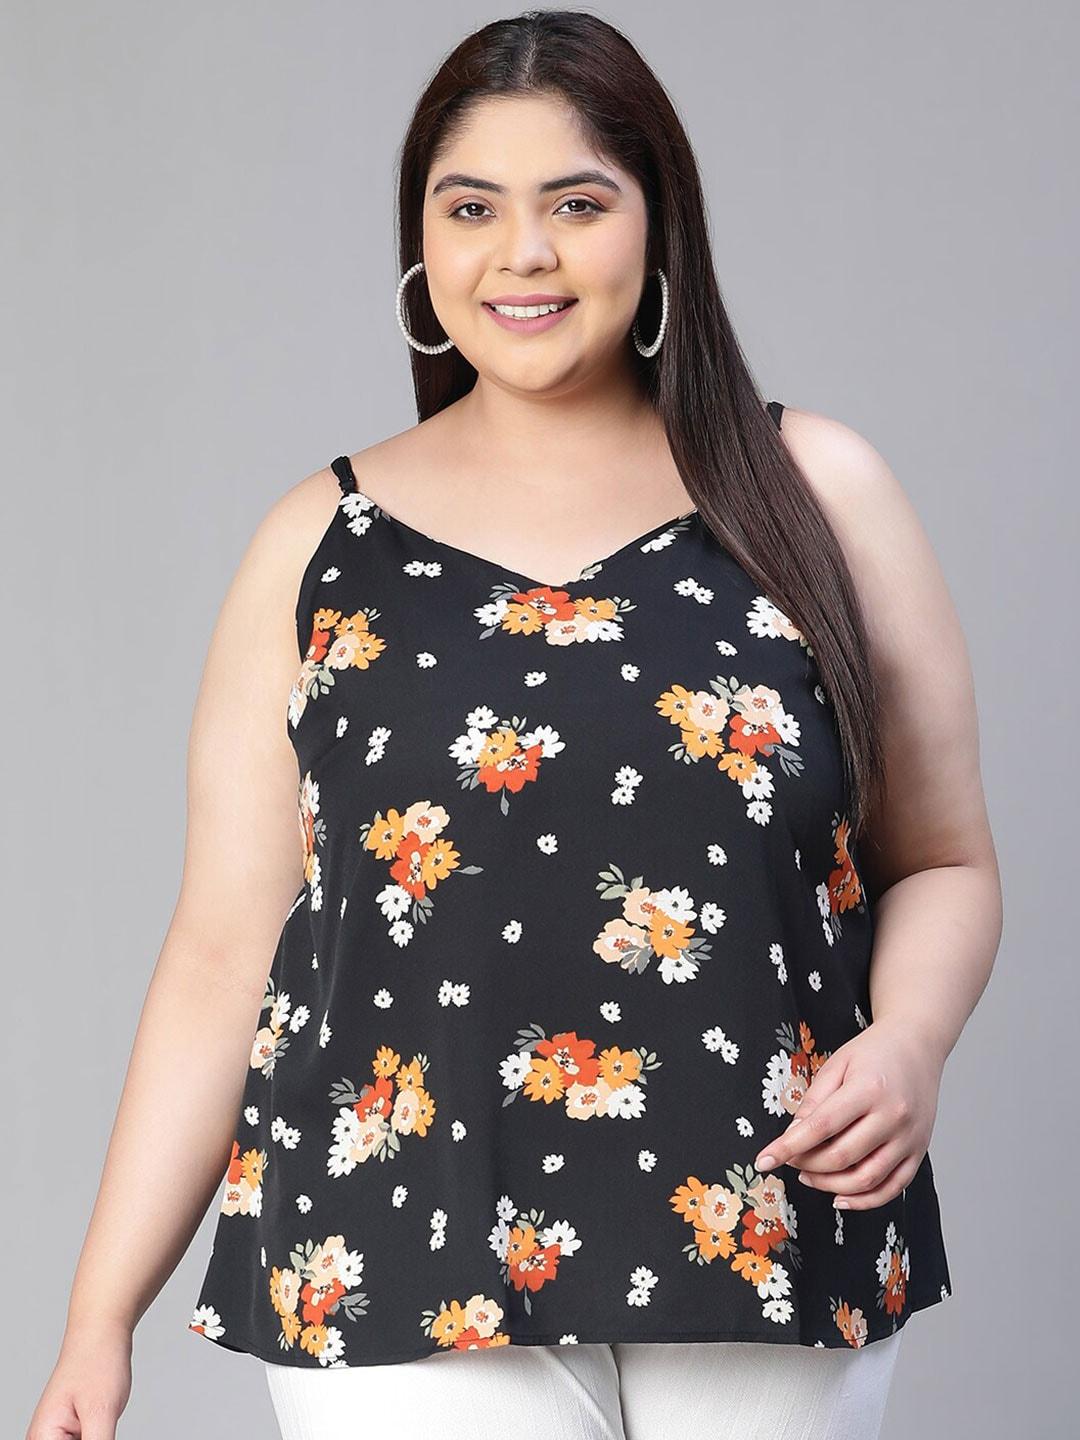 oxolloxo-plus-size-floral-printed-shoulder-straps-a-line-top